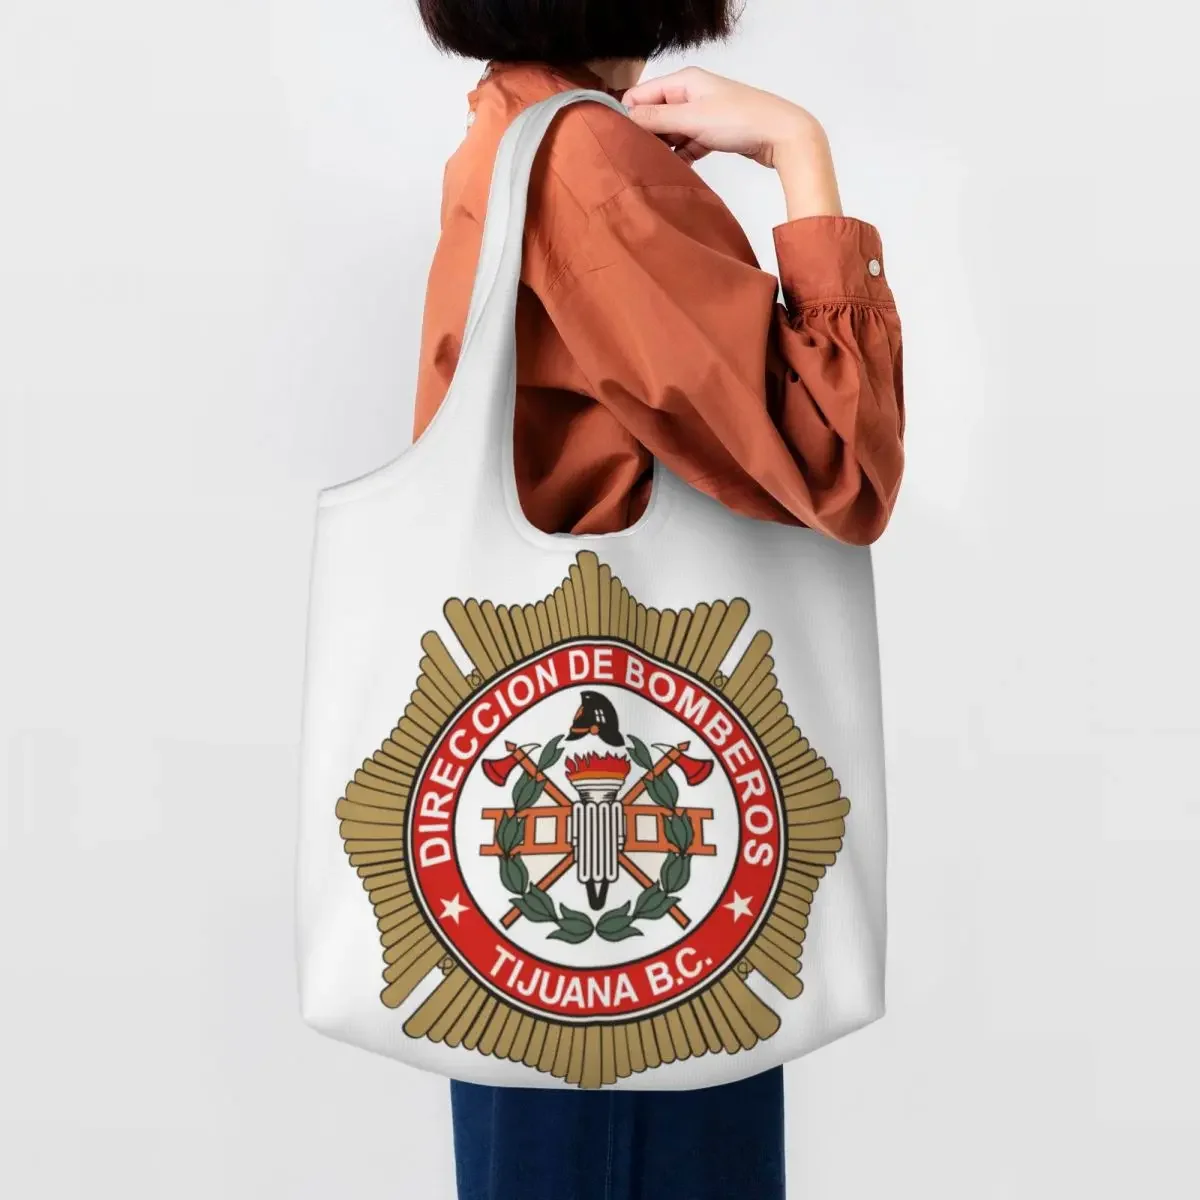 

Bomberos Firefighter Canvas Shopping Bag Women Washable Big Capacity Grocery Fireman Fire Rescue Shopper Tote Bags Handbags